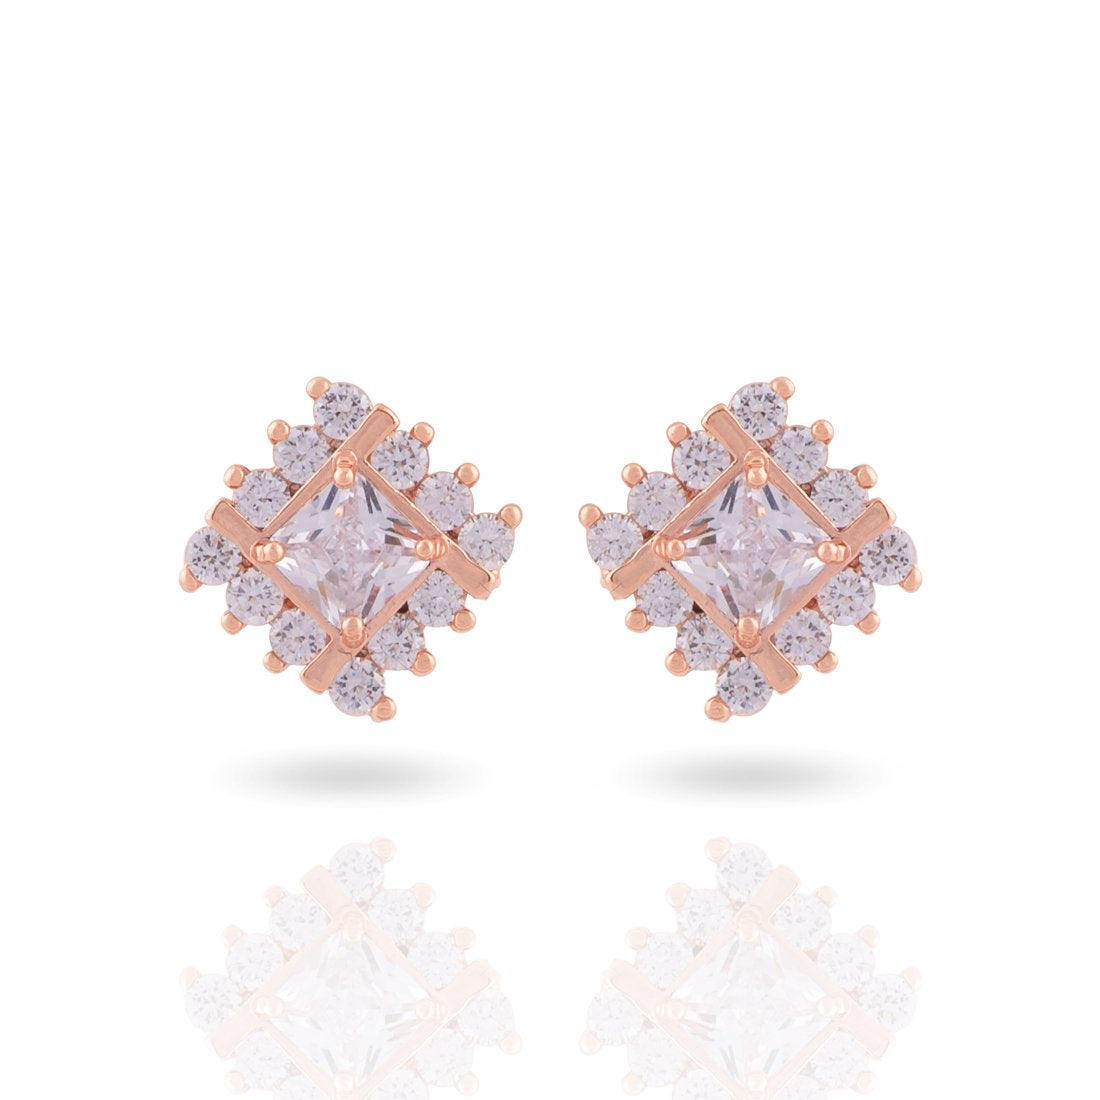 Meira Jewellery CZ & AD Studded Delicate Square Studs for Women & Girls